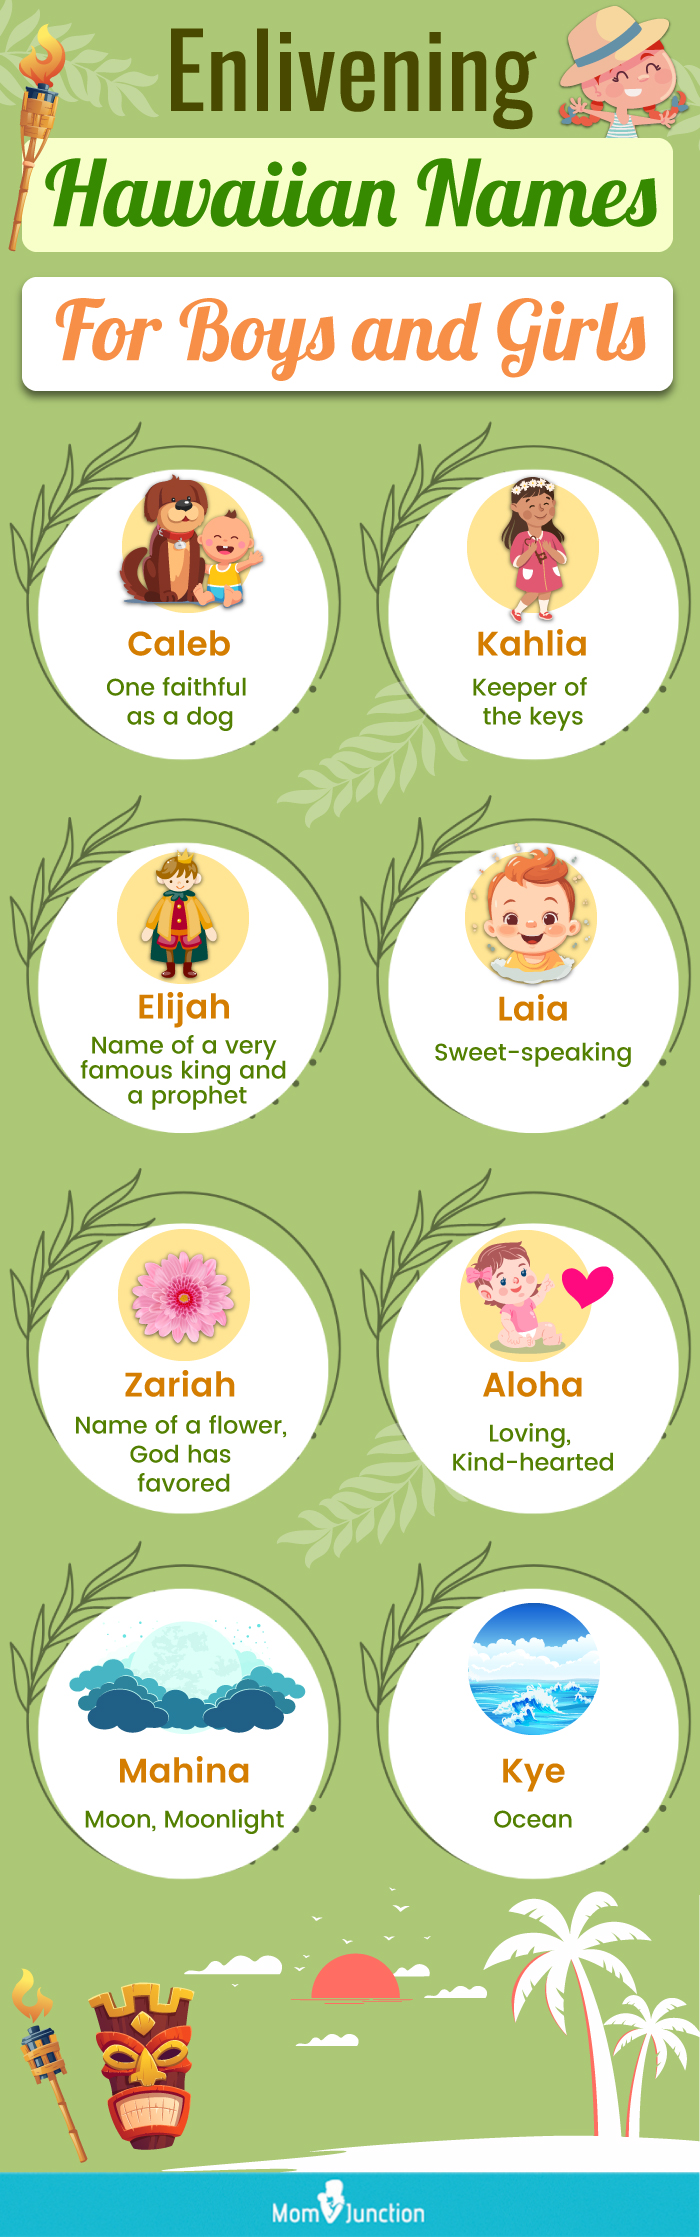 enlivening hawaiian names for boys and girls (infographic)